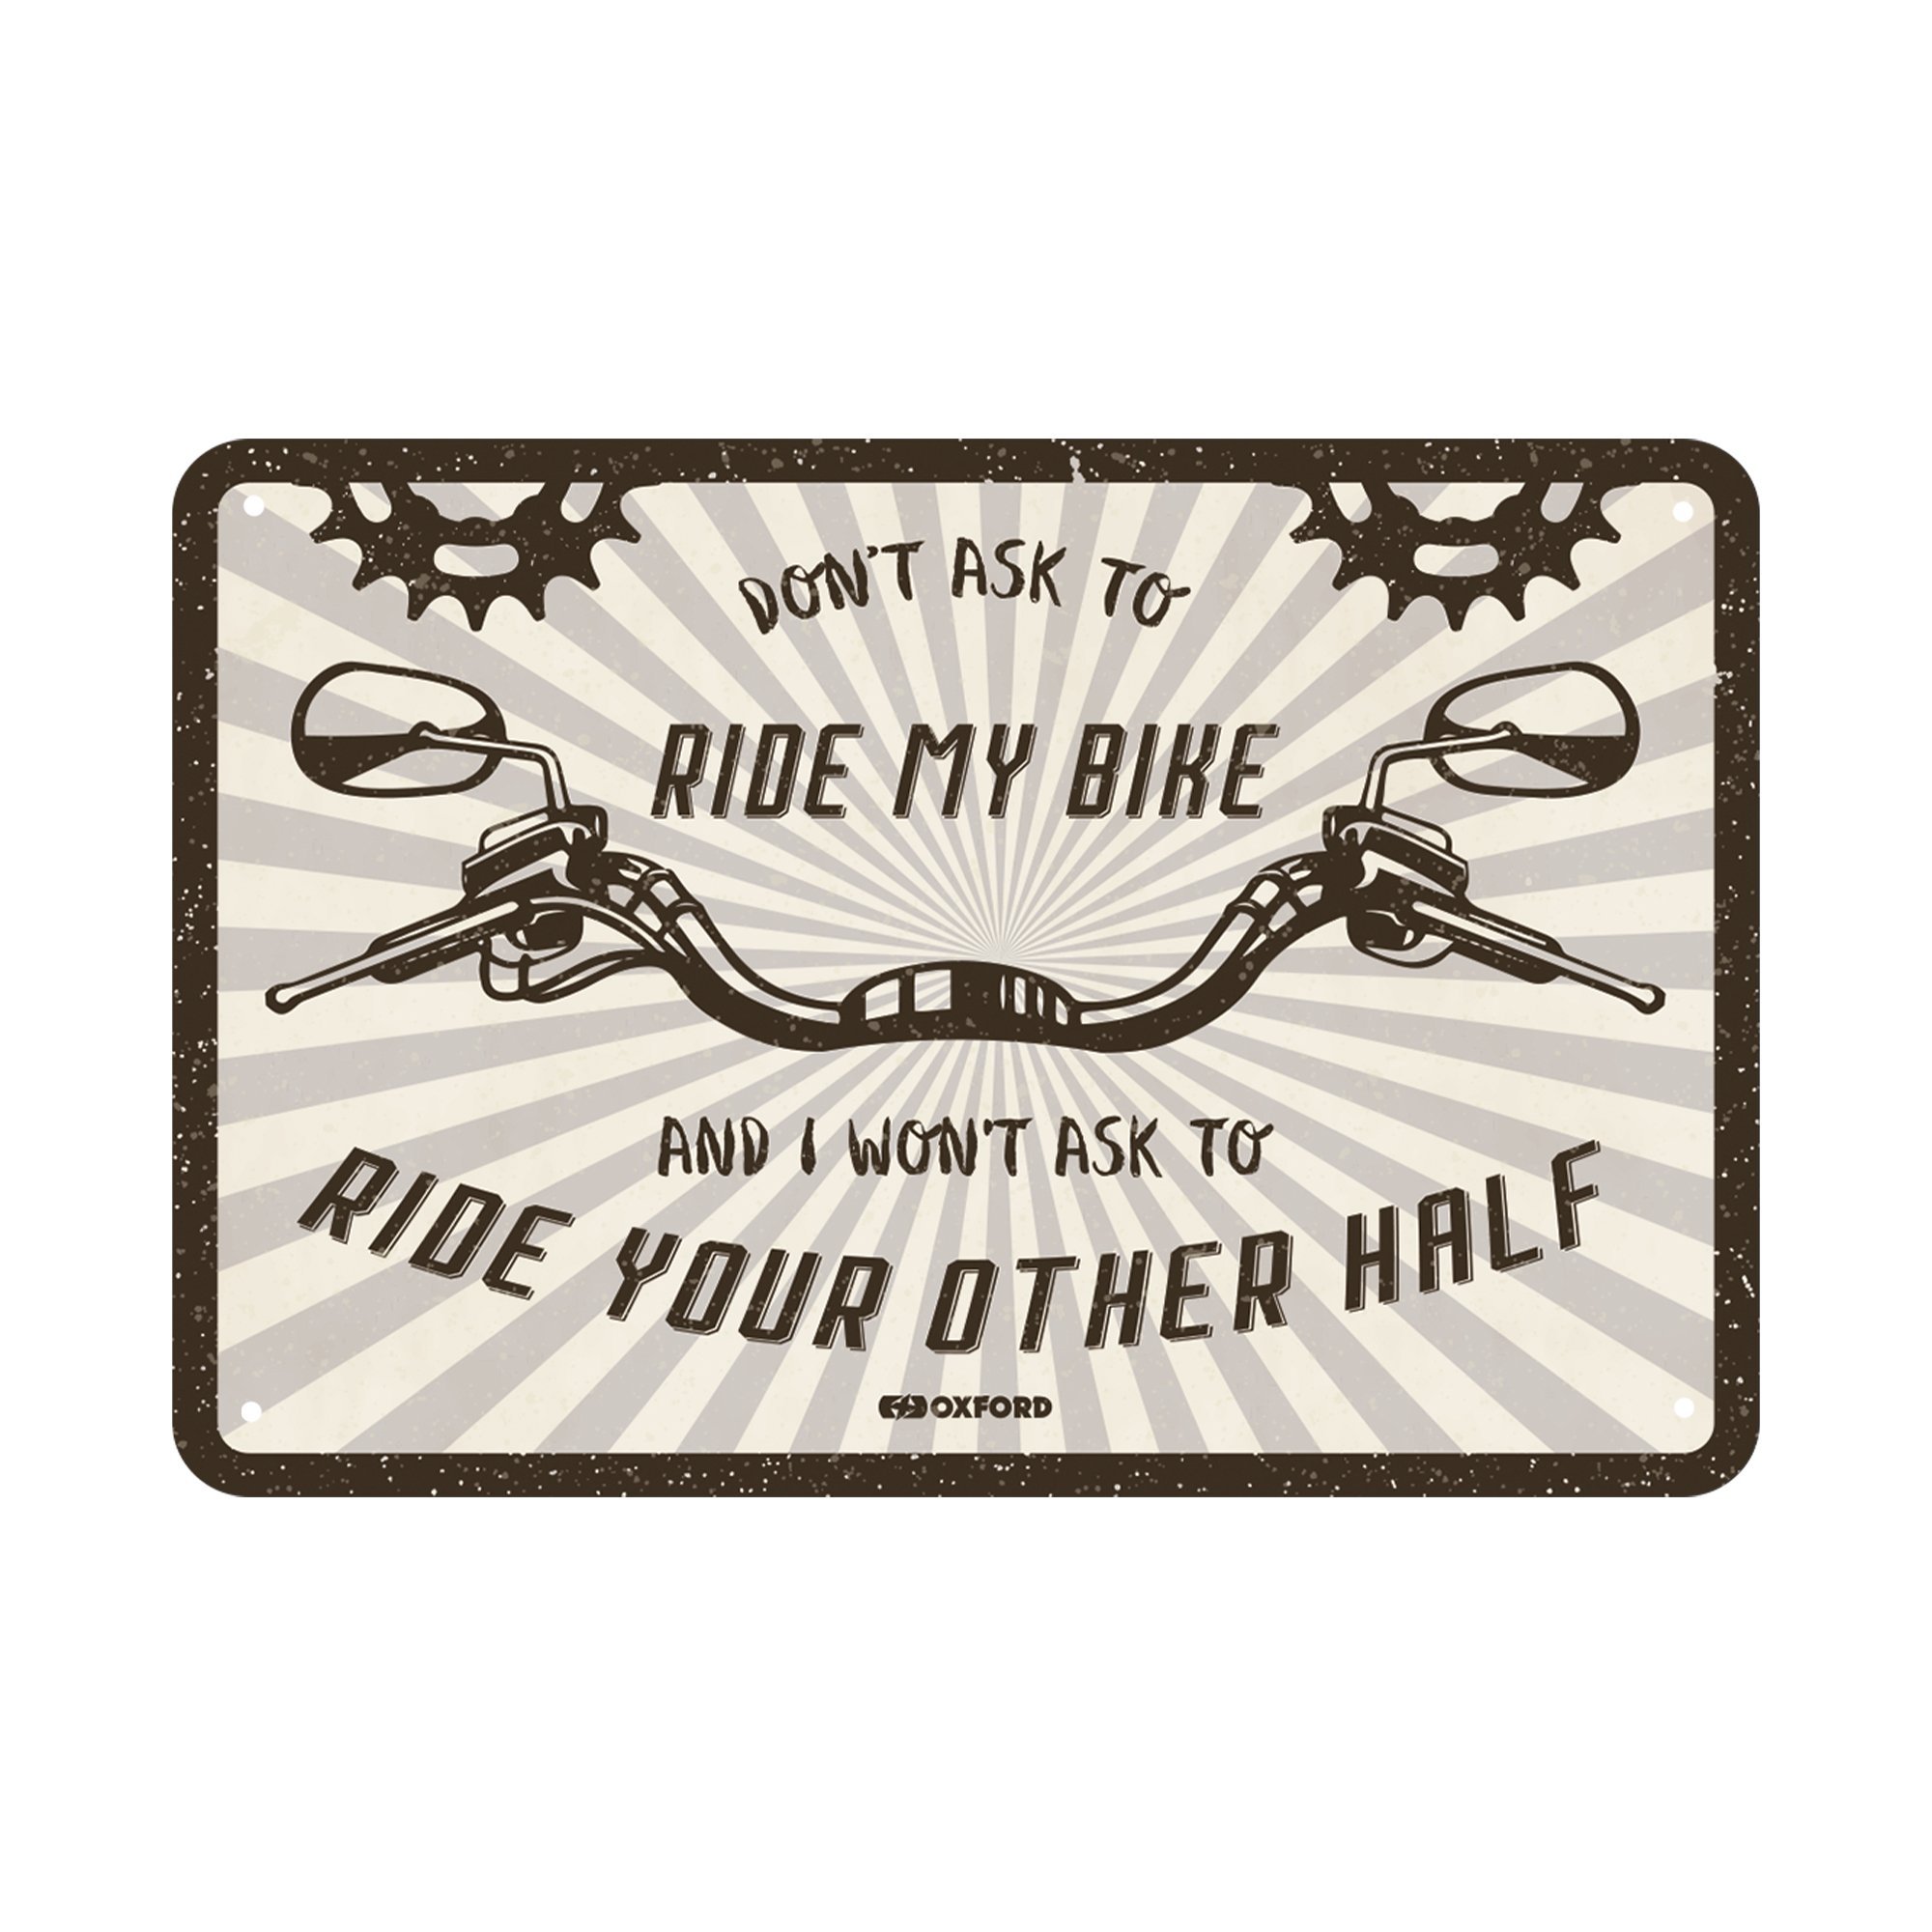 Oxford Garage Metal Sign: DON'T ASK TO RIDE MY BIKE